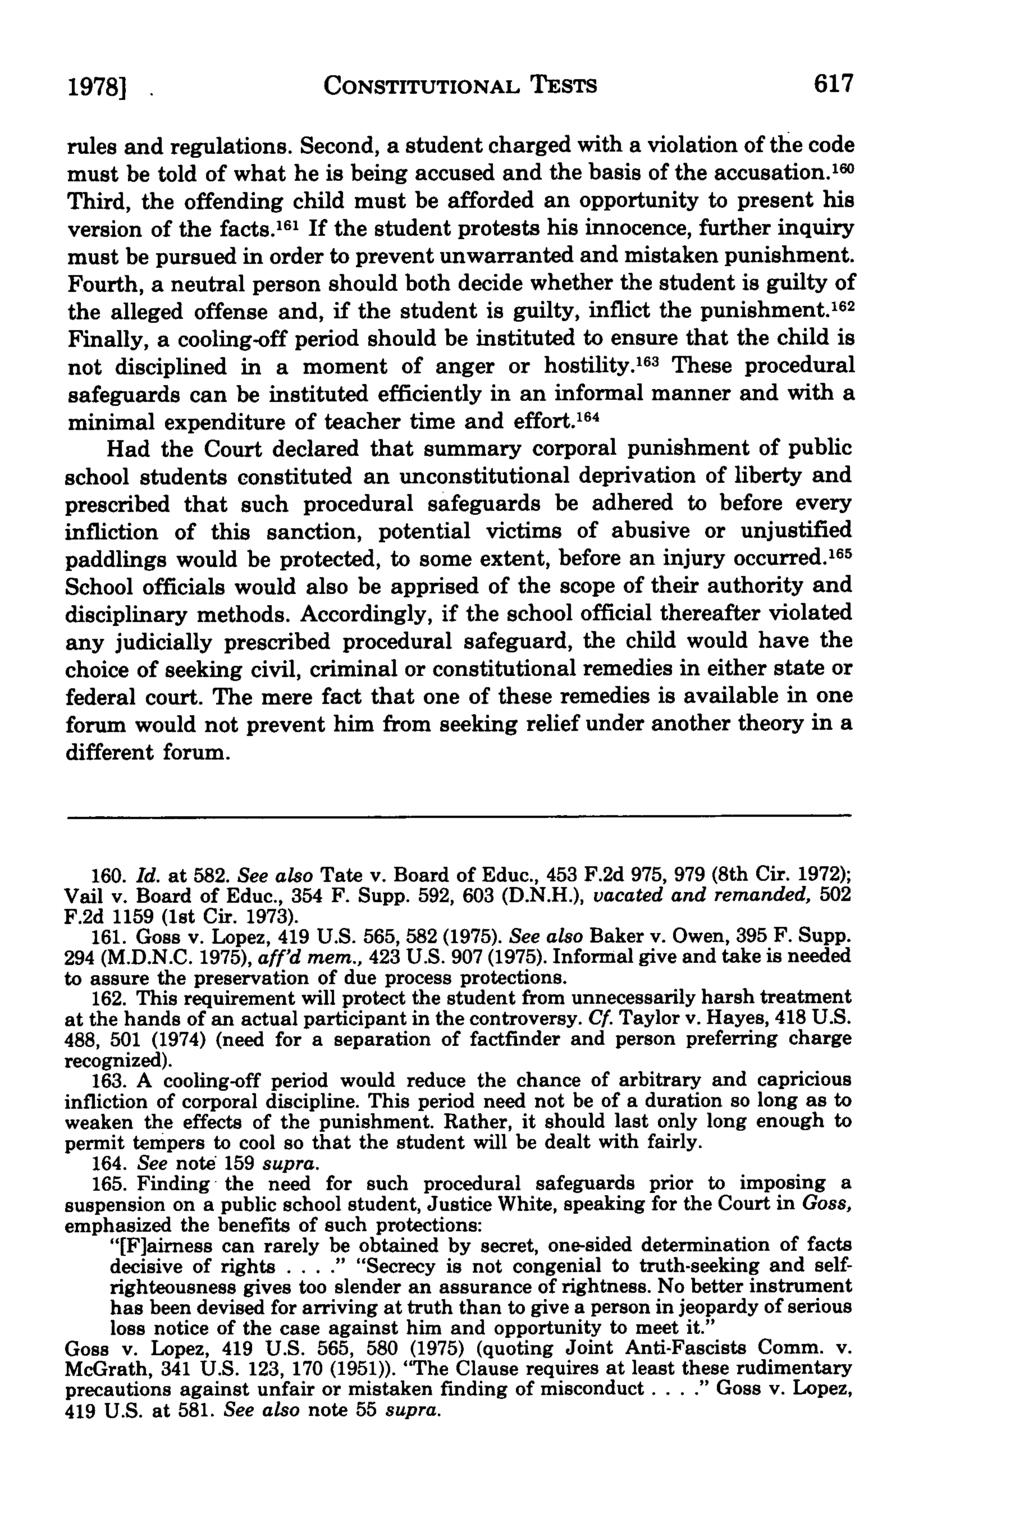 1978] CONSTITUTIONAL TESTS rules and regulations. Second, a student charged with a violation of the code must be told of what he is being accused and the basis of the accusation.